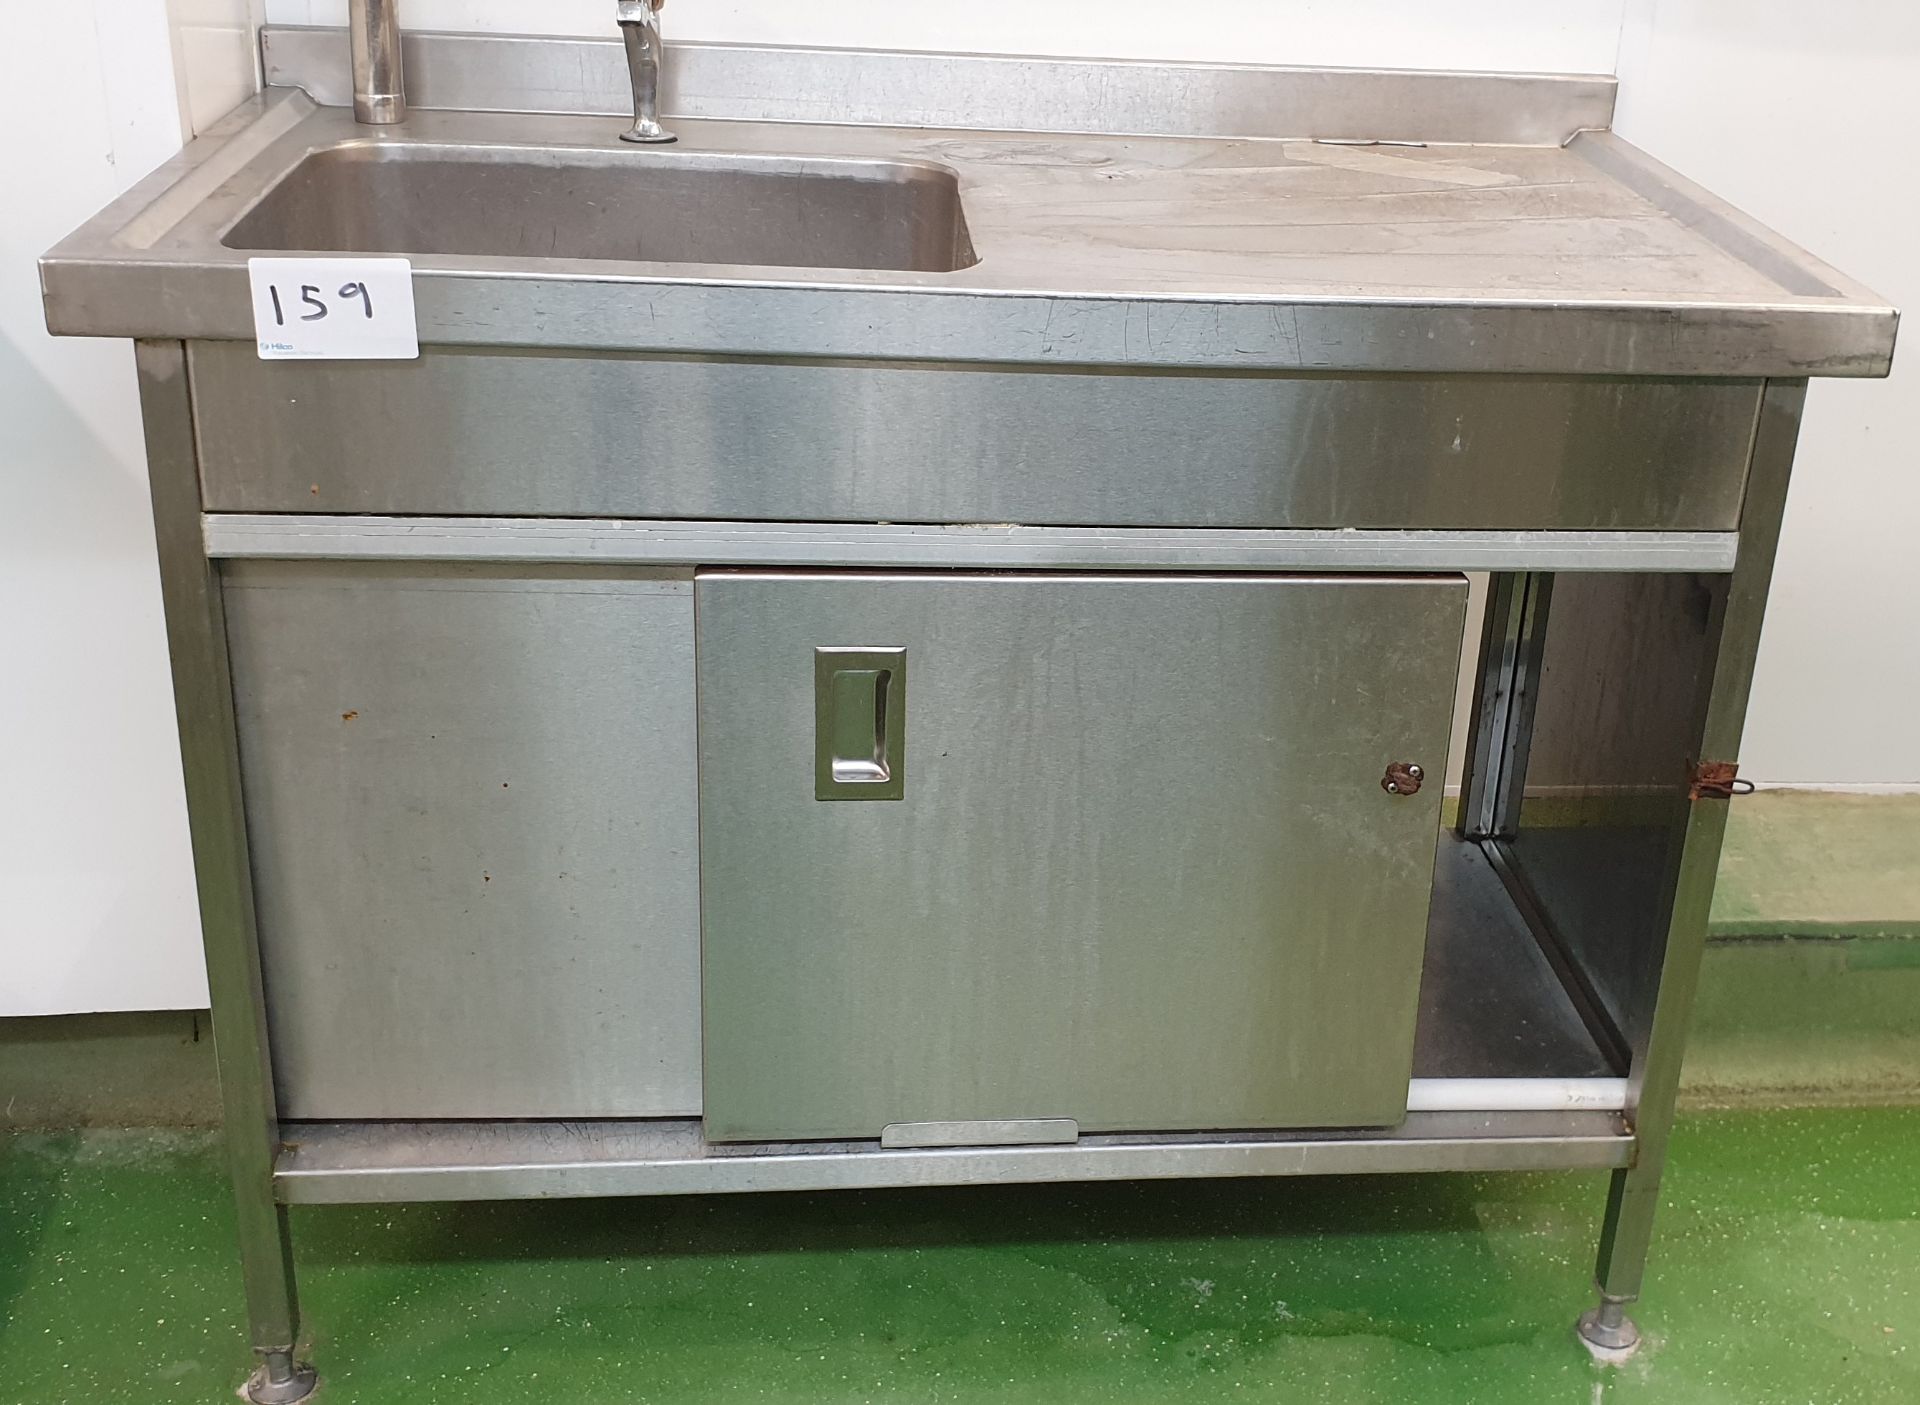 Stainless Steel 2 Sliding Door cupboard complete with single sink unit, 1.20m(l) x 0.65m(w) x 0.89m(